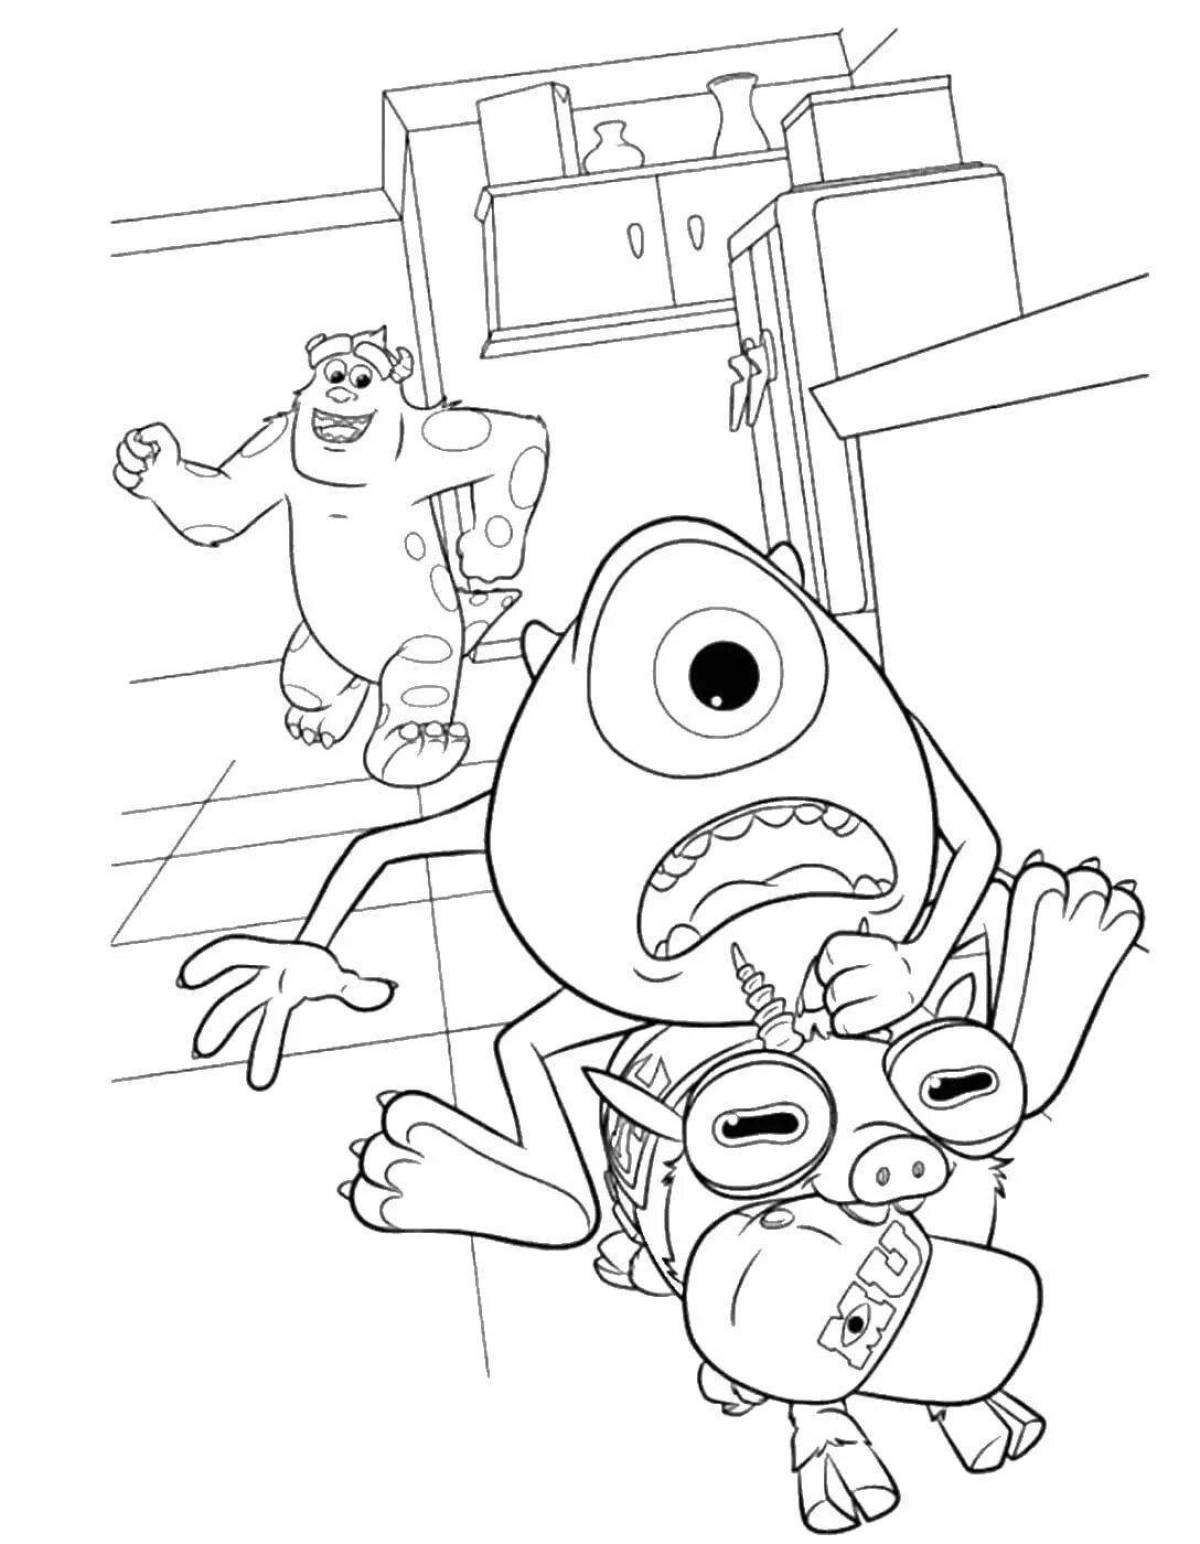 Glowing Monsters University coloring page